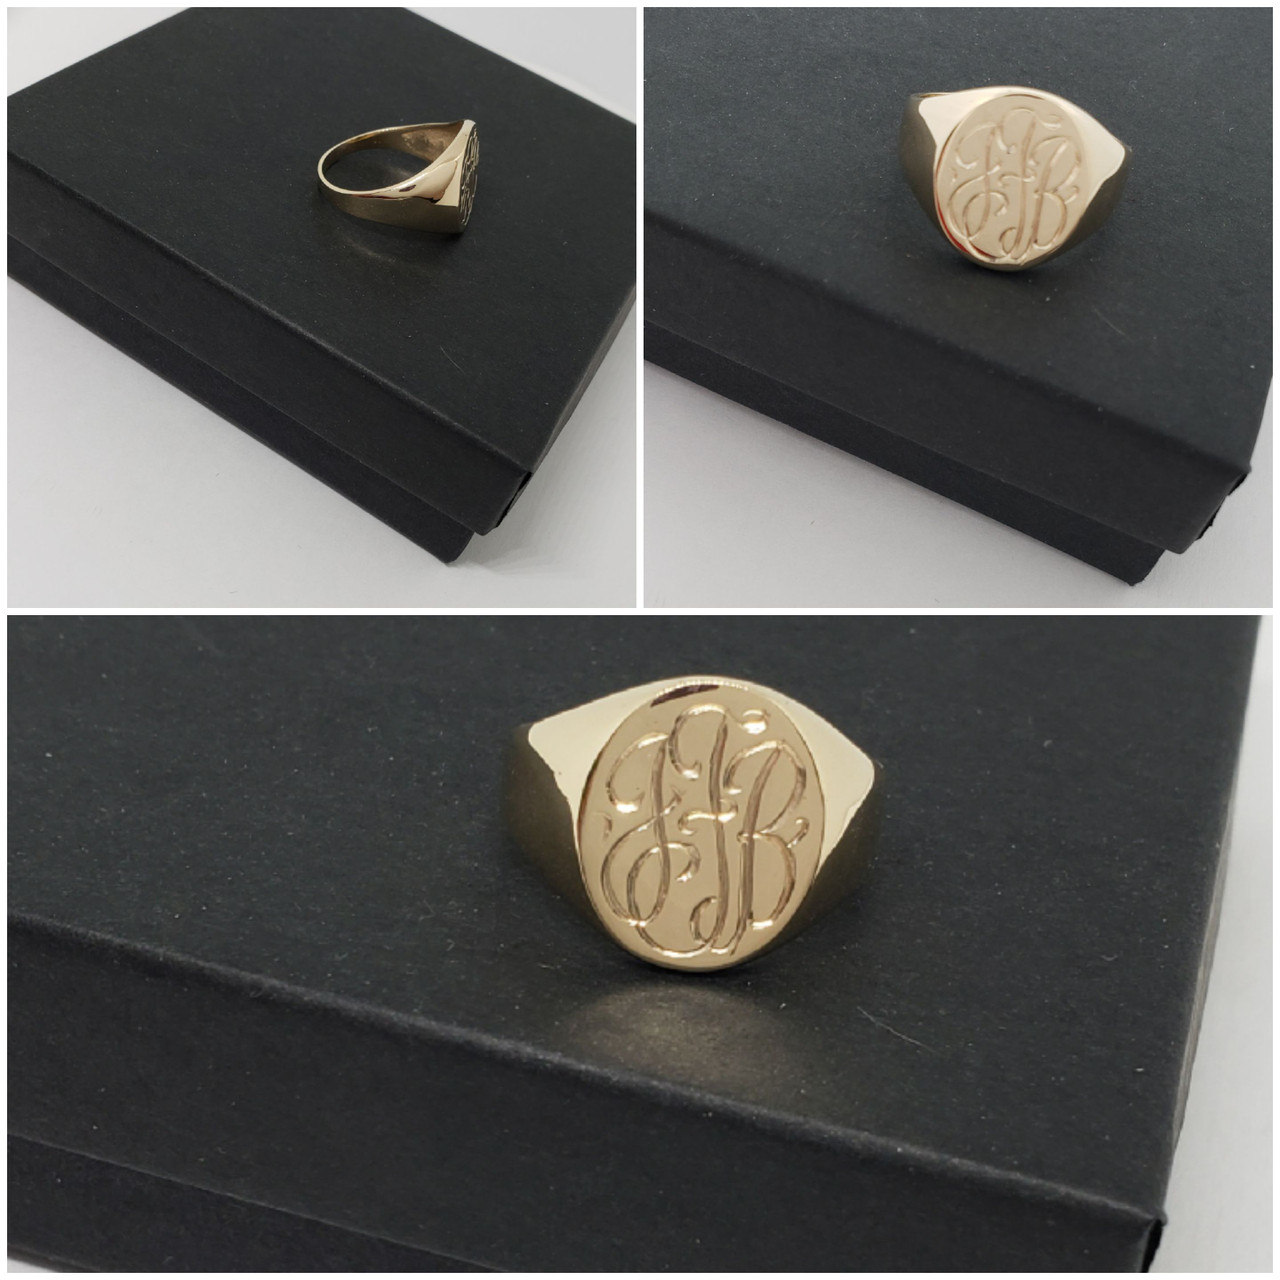 Personalized large oval signet ring with engraved monogrammed